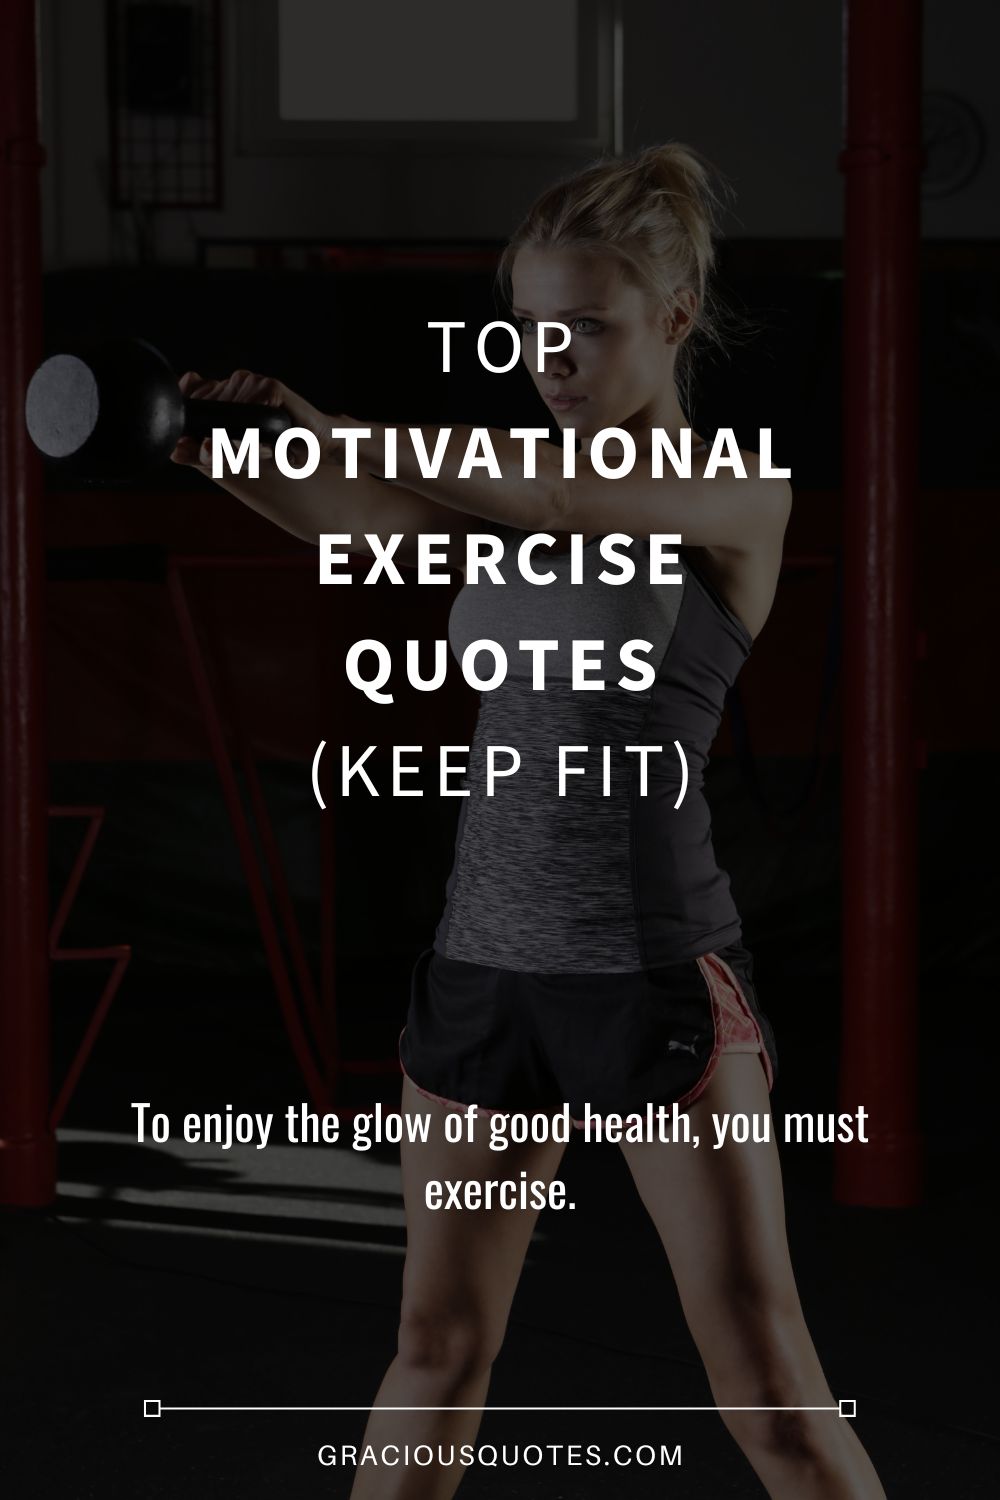 Top Motivational Exercise Quotes (KEEP FIT) - Gracious Quotes